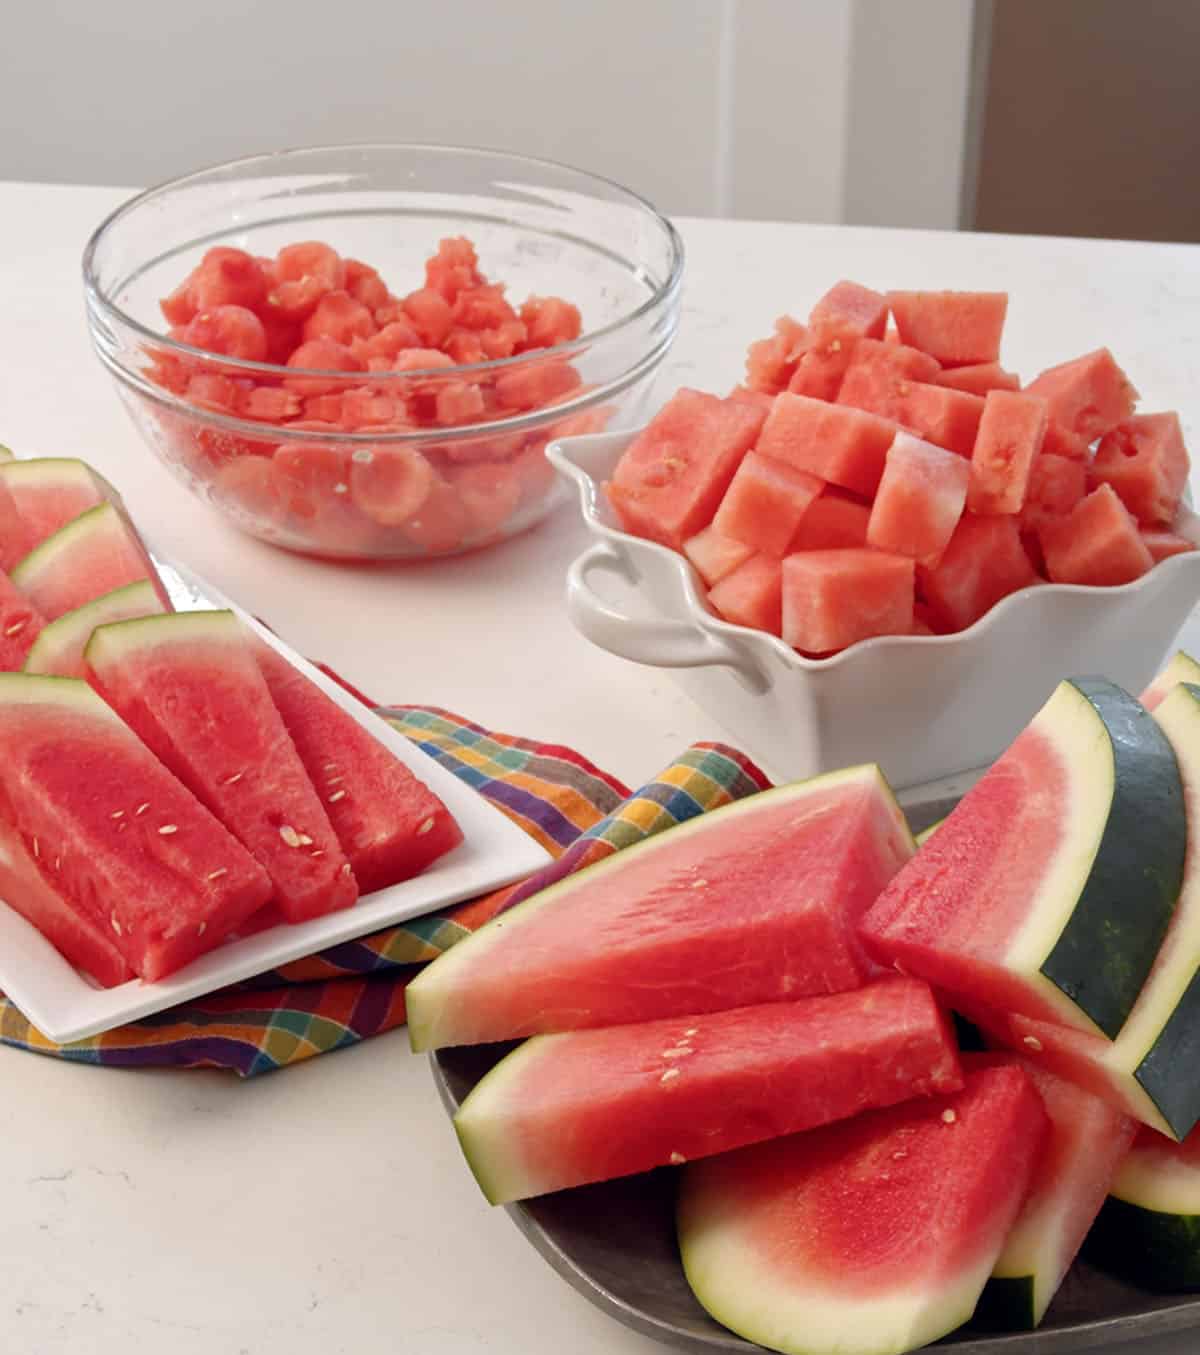 Slices of watermelon are placed in front of two bowls of watermelon chunks. 